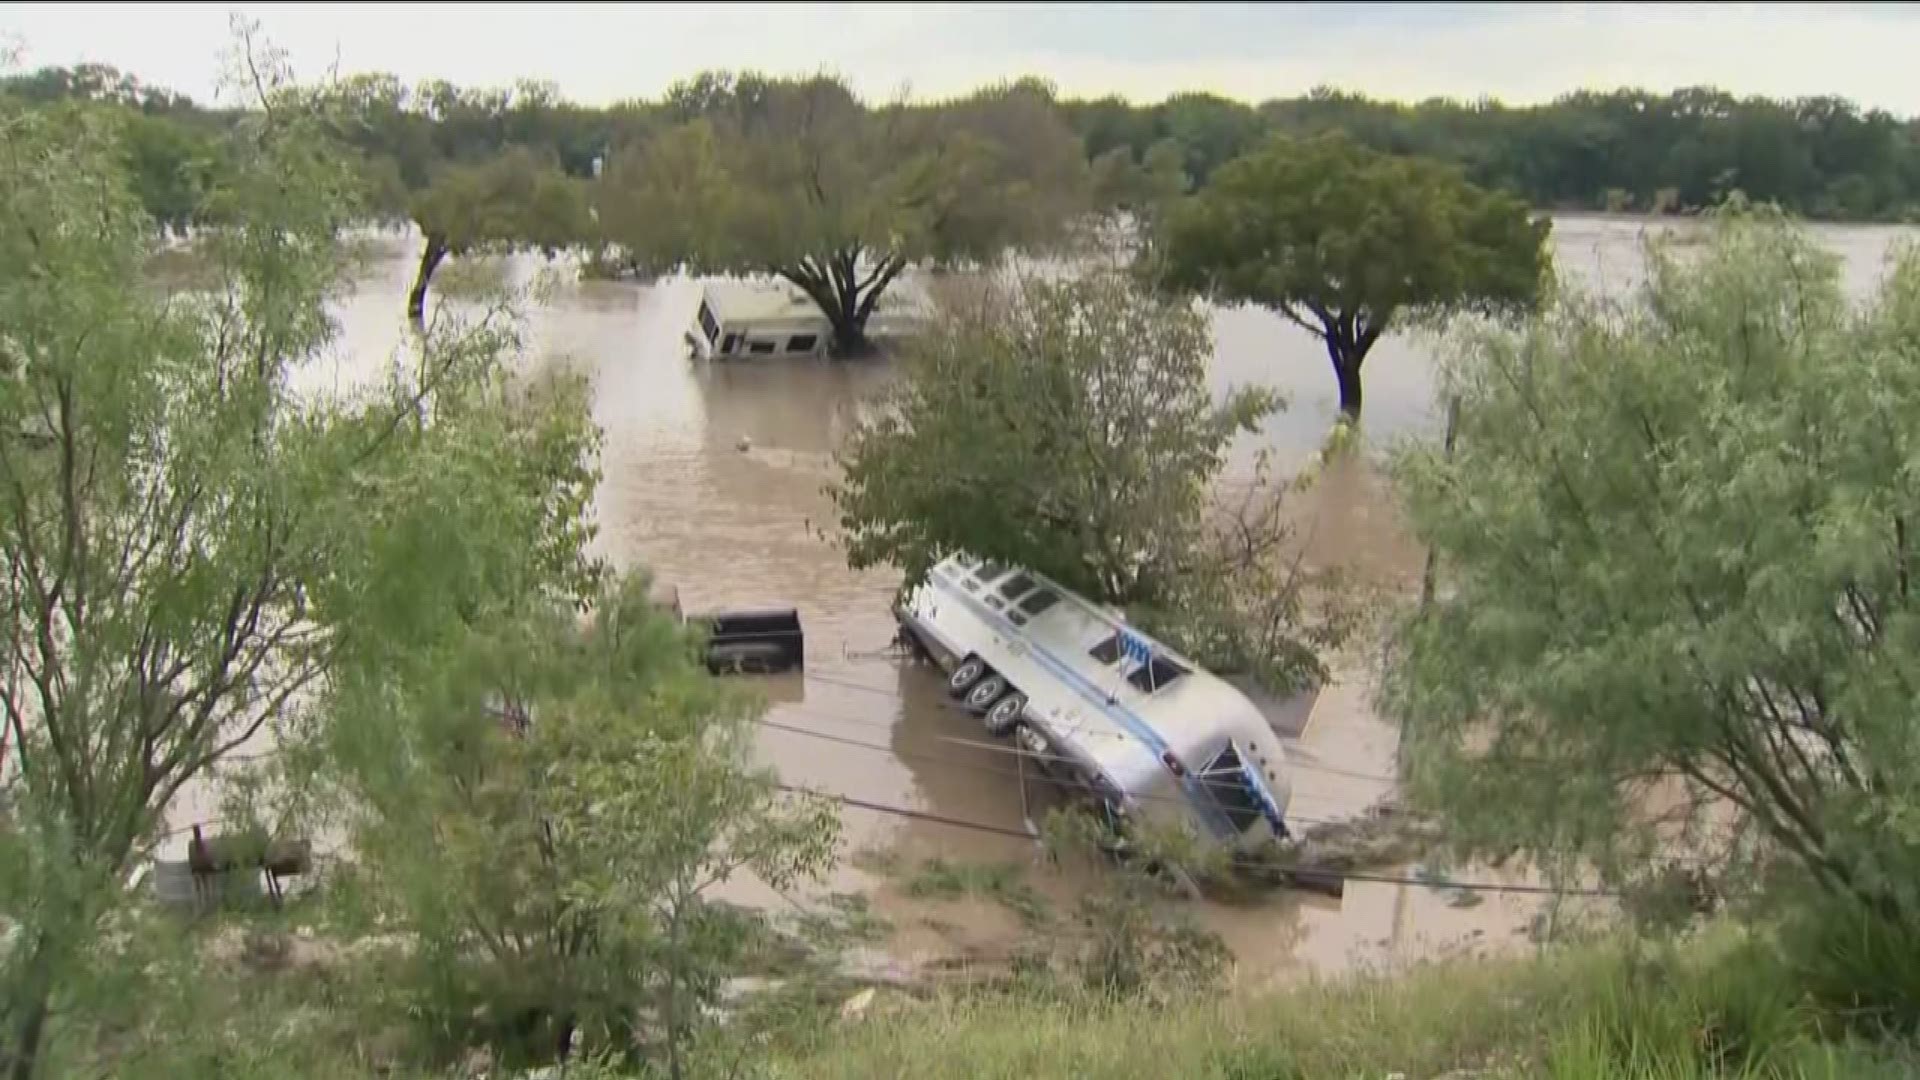 A body has been found in the water at the Colorado River at about noon Tuesday following "historic" flooding in Central Texas, according to Burnet County officials.

Officials said the body, which has not been identified yet, was found on the east bank of